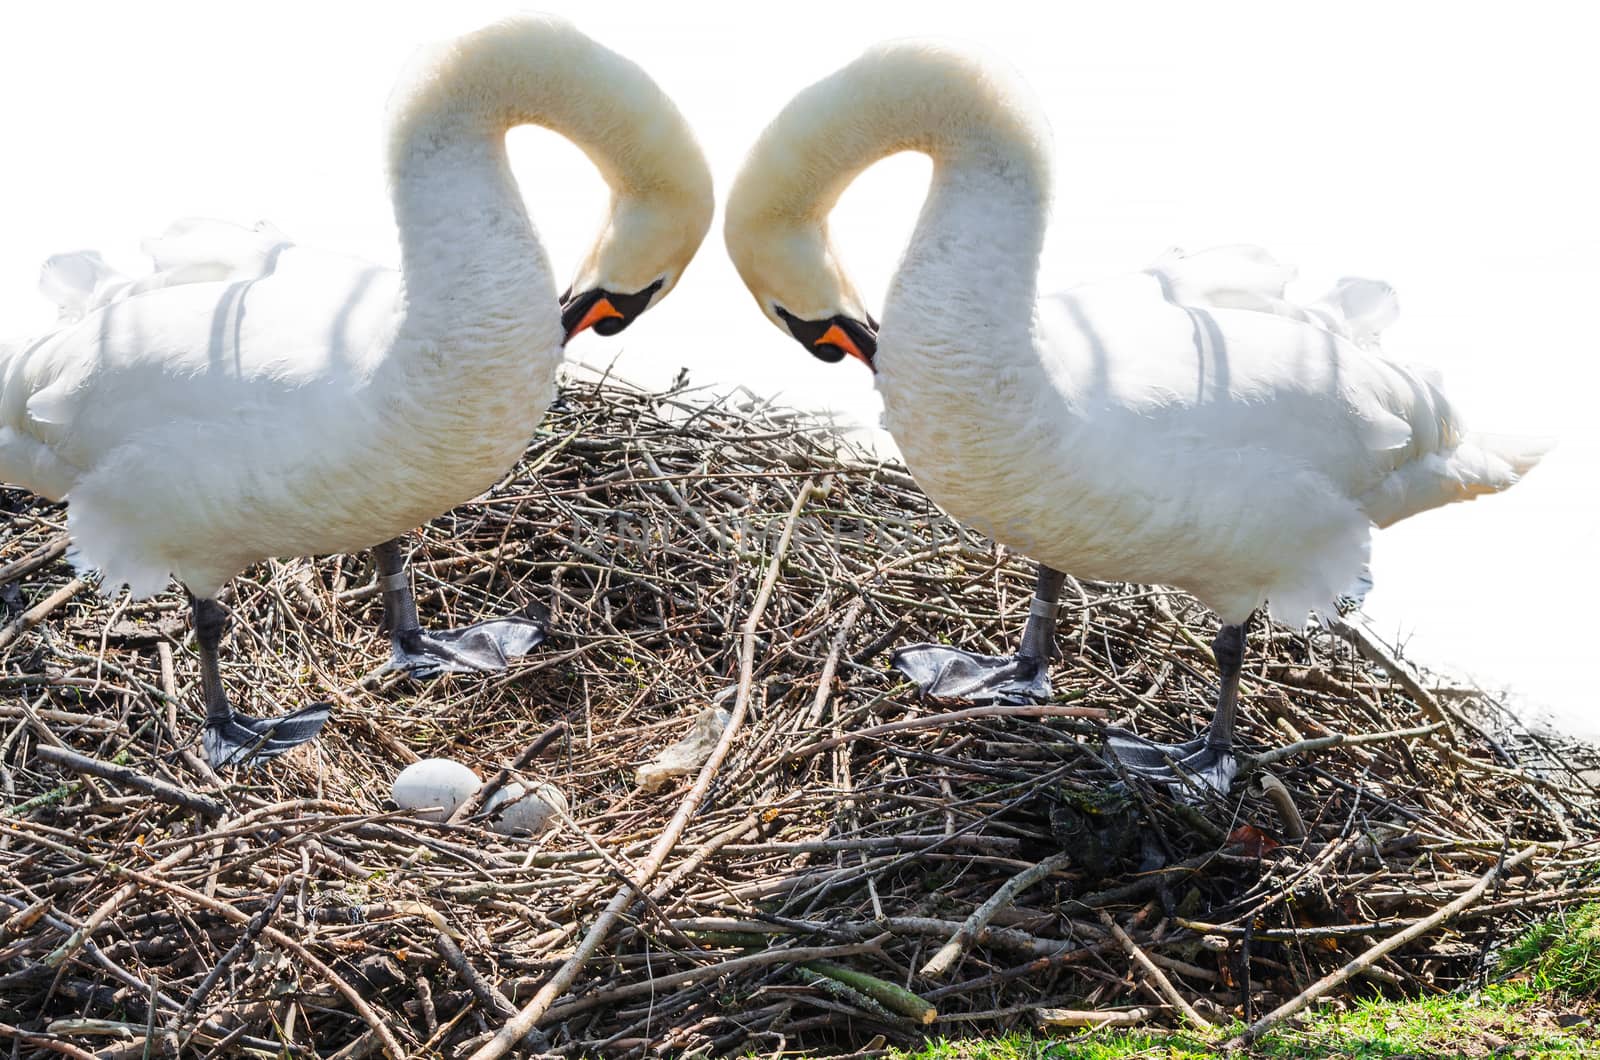 Two swans on the nest by JFsPic